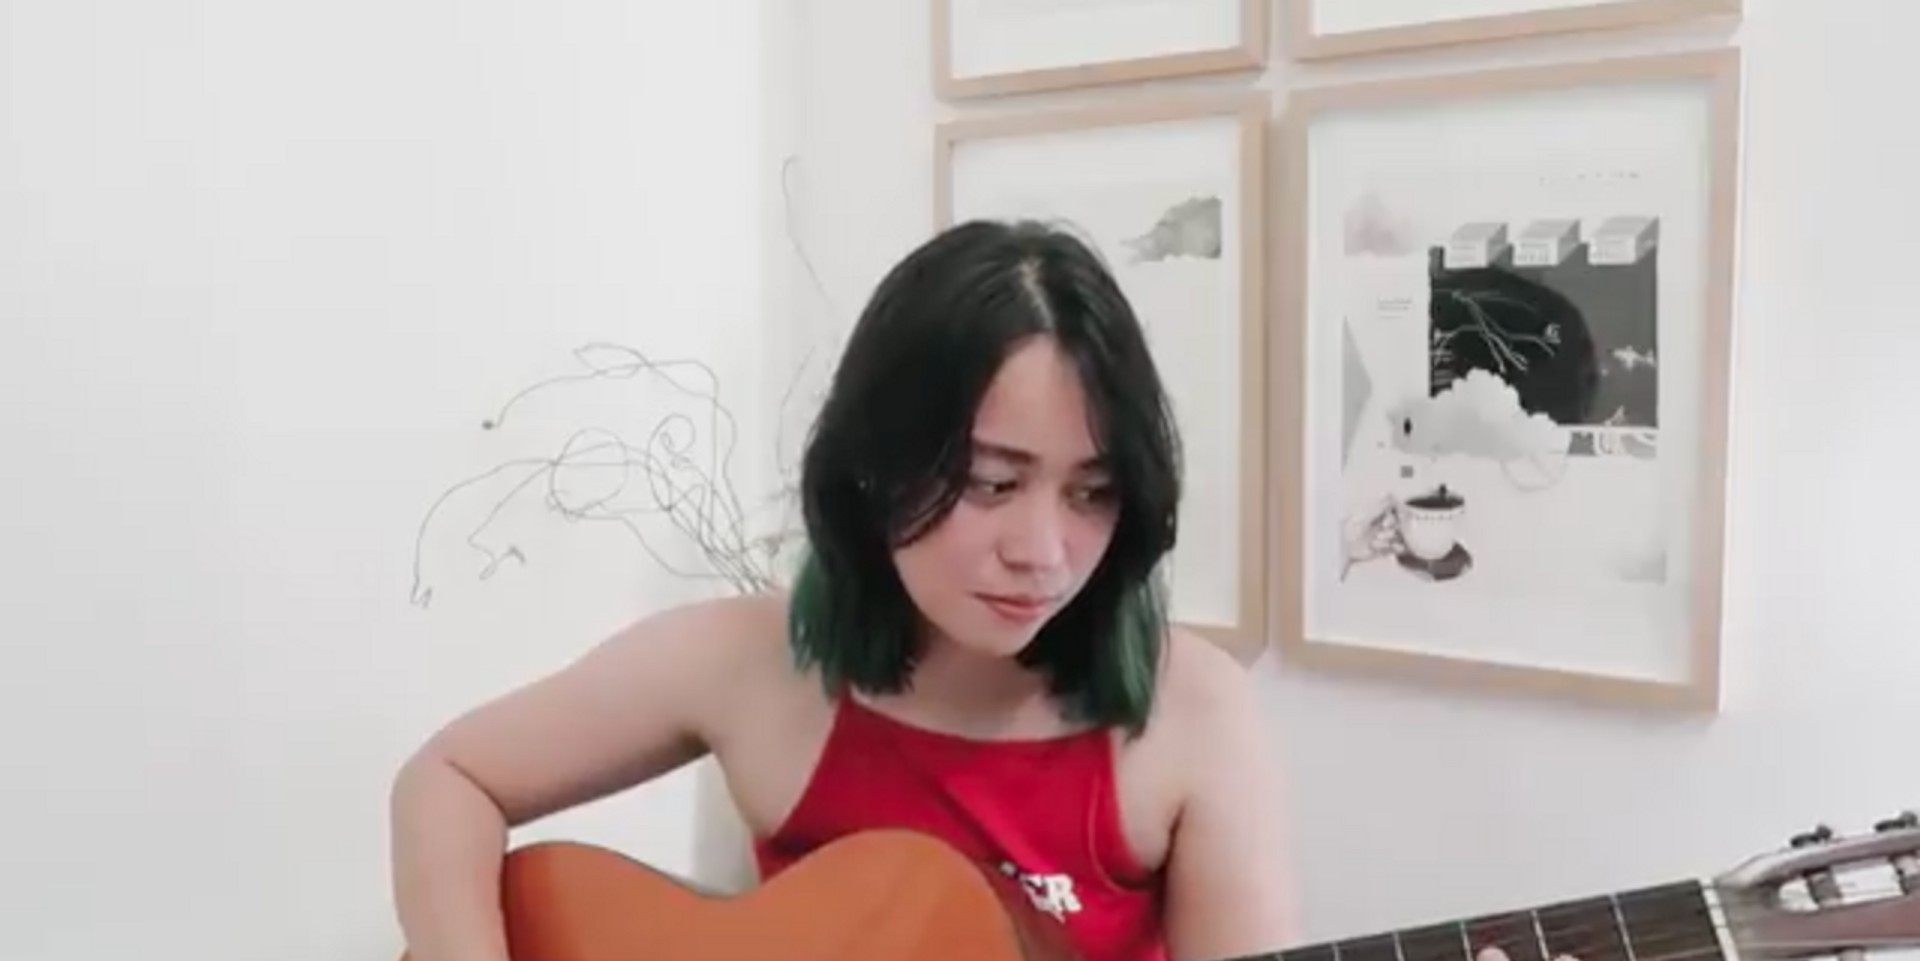 Reese Lansangan covers the High School Musical hit "What I've Been Looking For" – watch